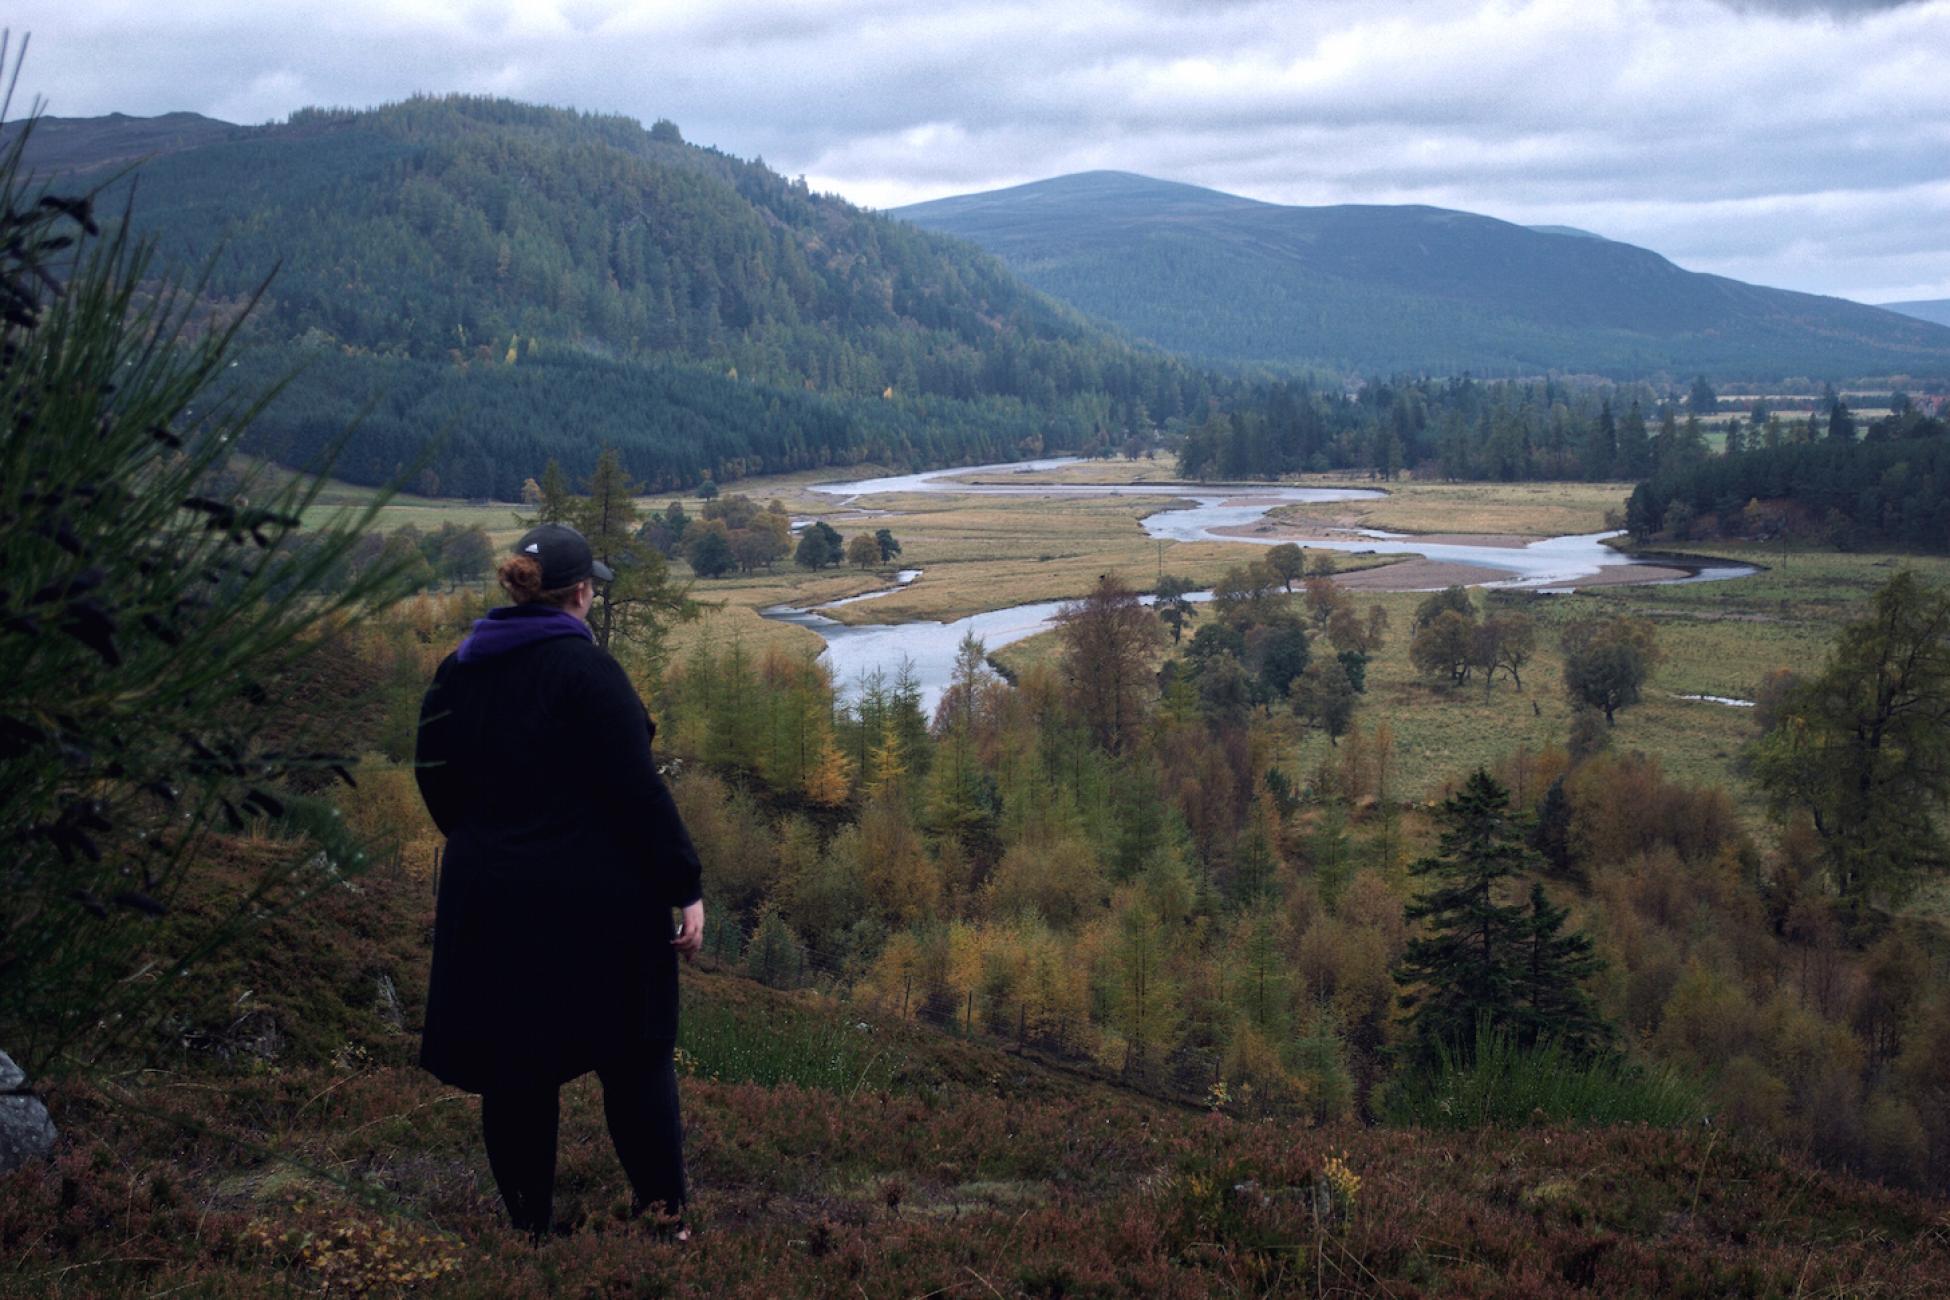 Overlooking the River Dee that passes through Cairngorms National Park in Scotland.